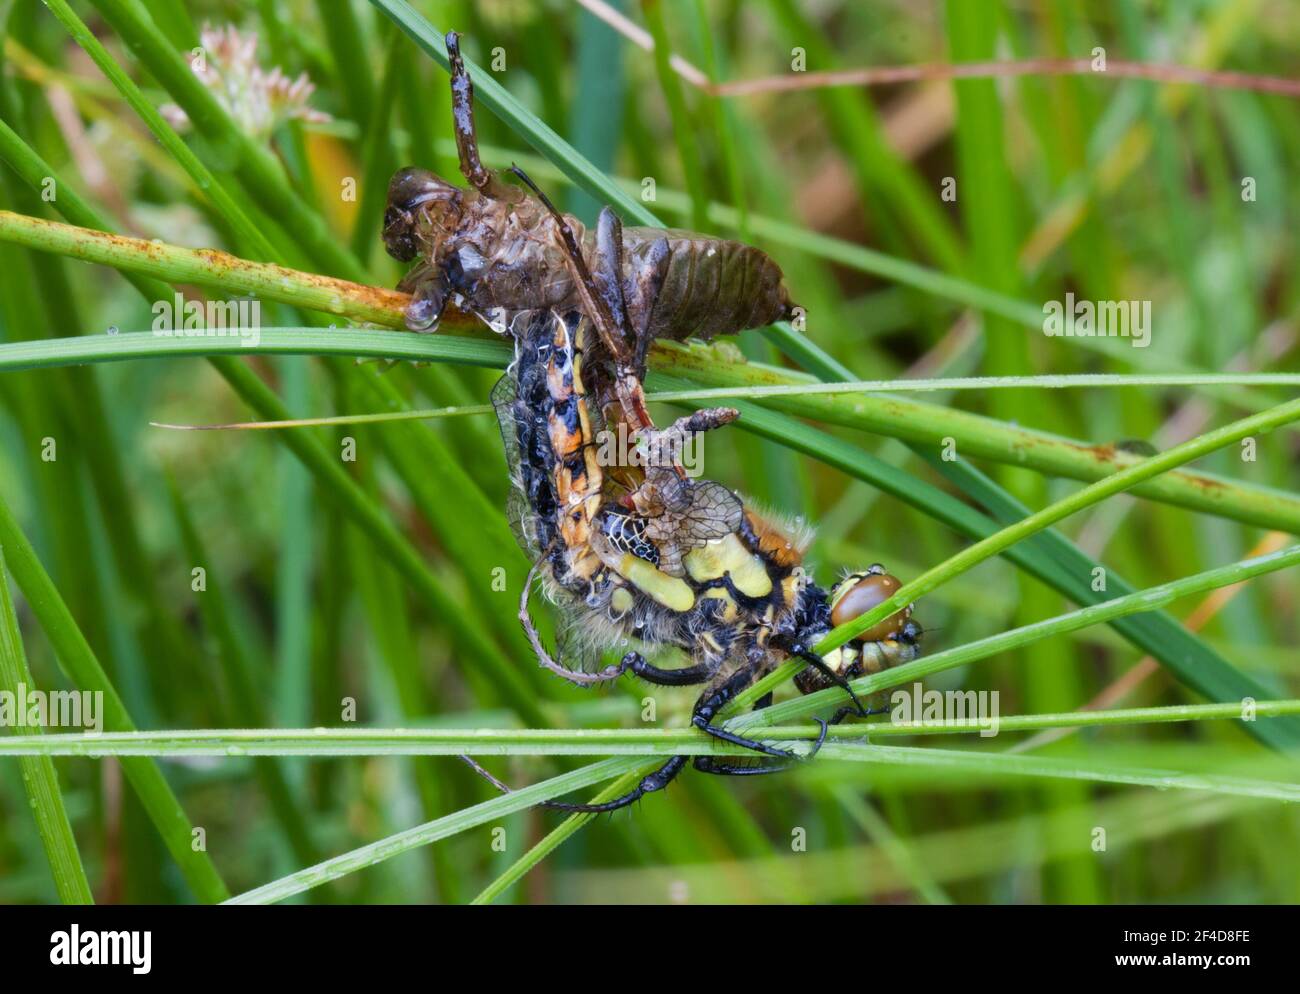 Emergence and metamorphosis: Dragonfly crawling out of larval skin Stock Photo